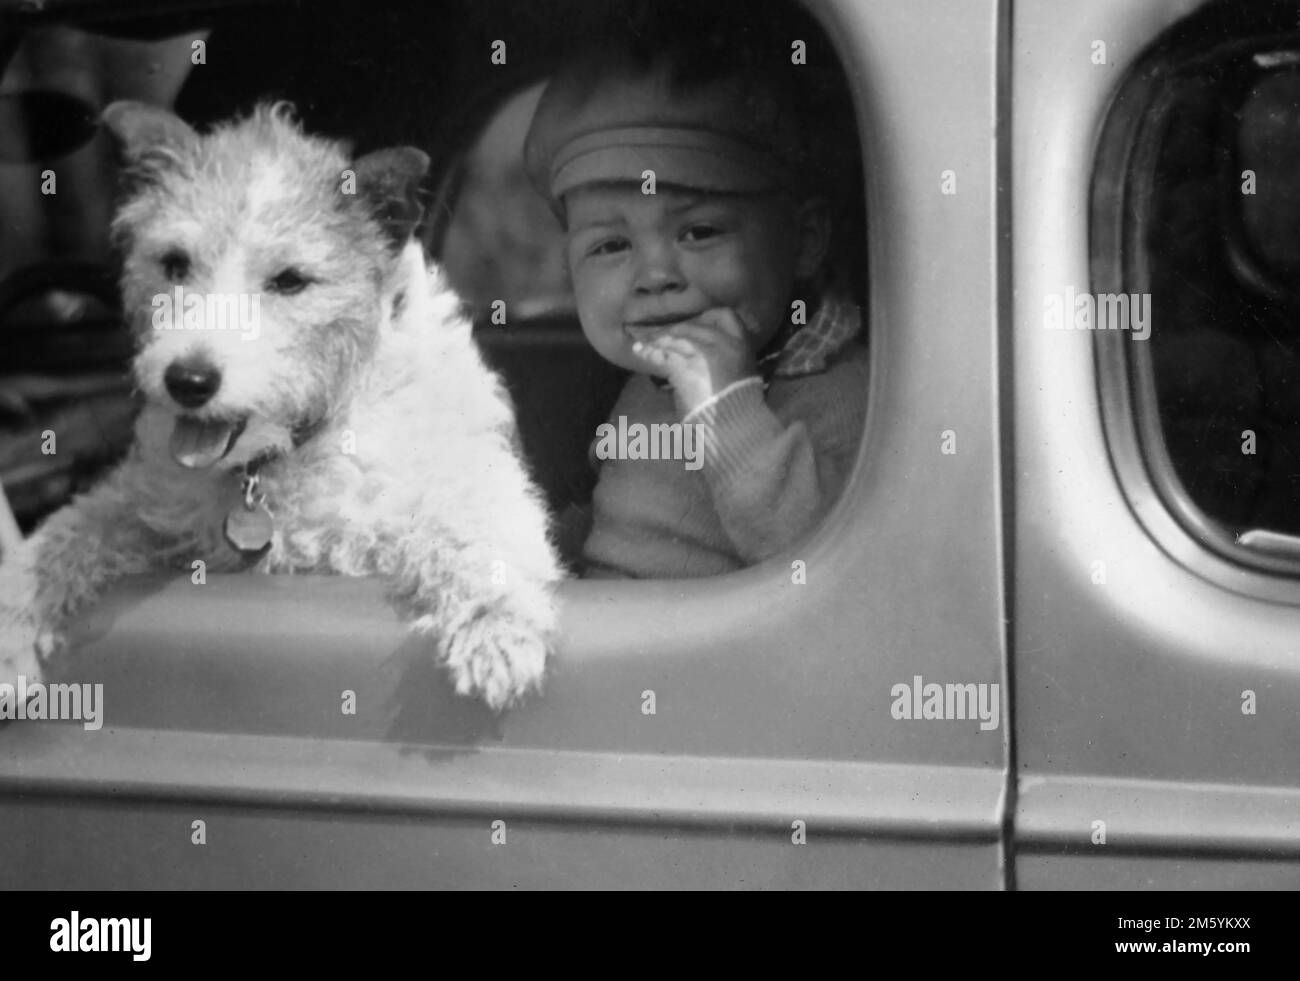 A young boy and his dog peer out of a car window, ca. 1936. Stock Photo